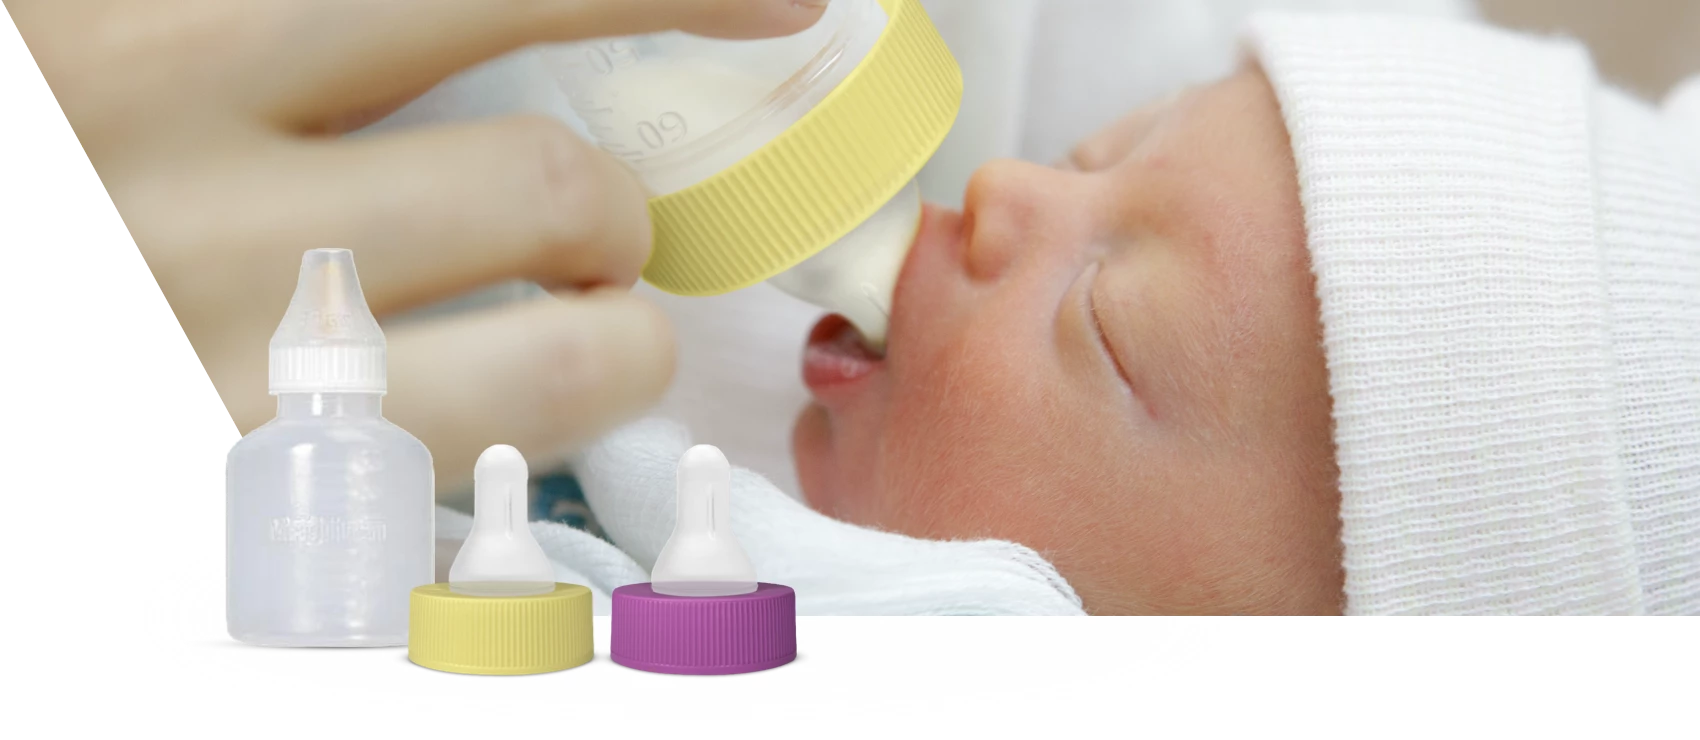 Newborn baby drinking from a bottle; Enfamil Accessories product lineup